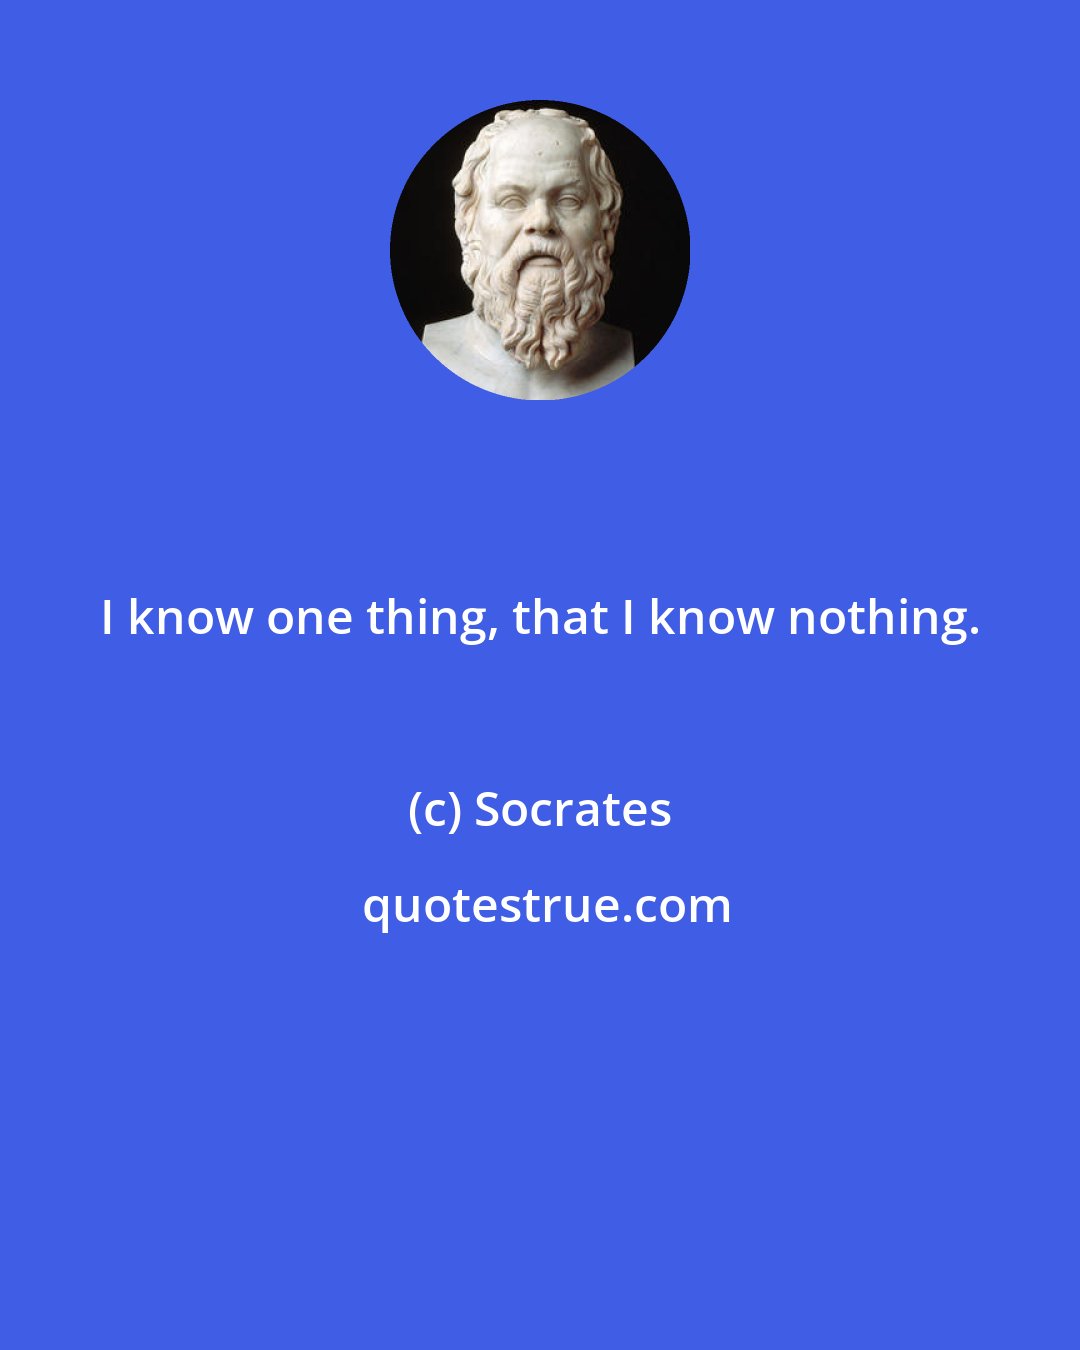 Socrates: I know one thing, that I know nothing.